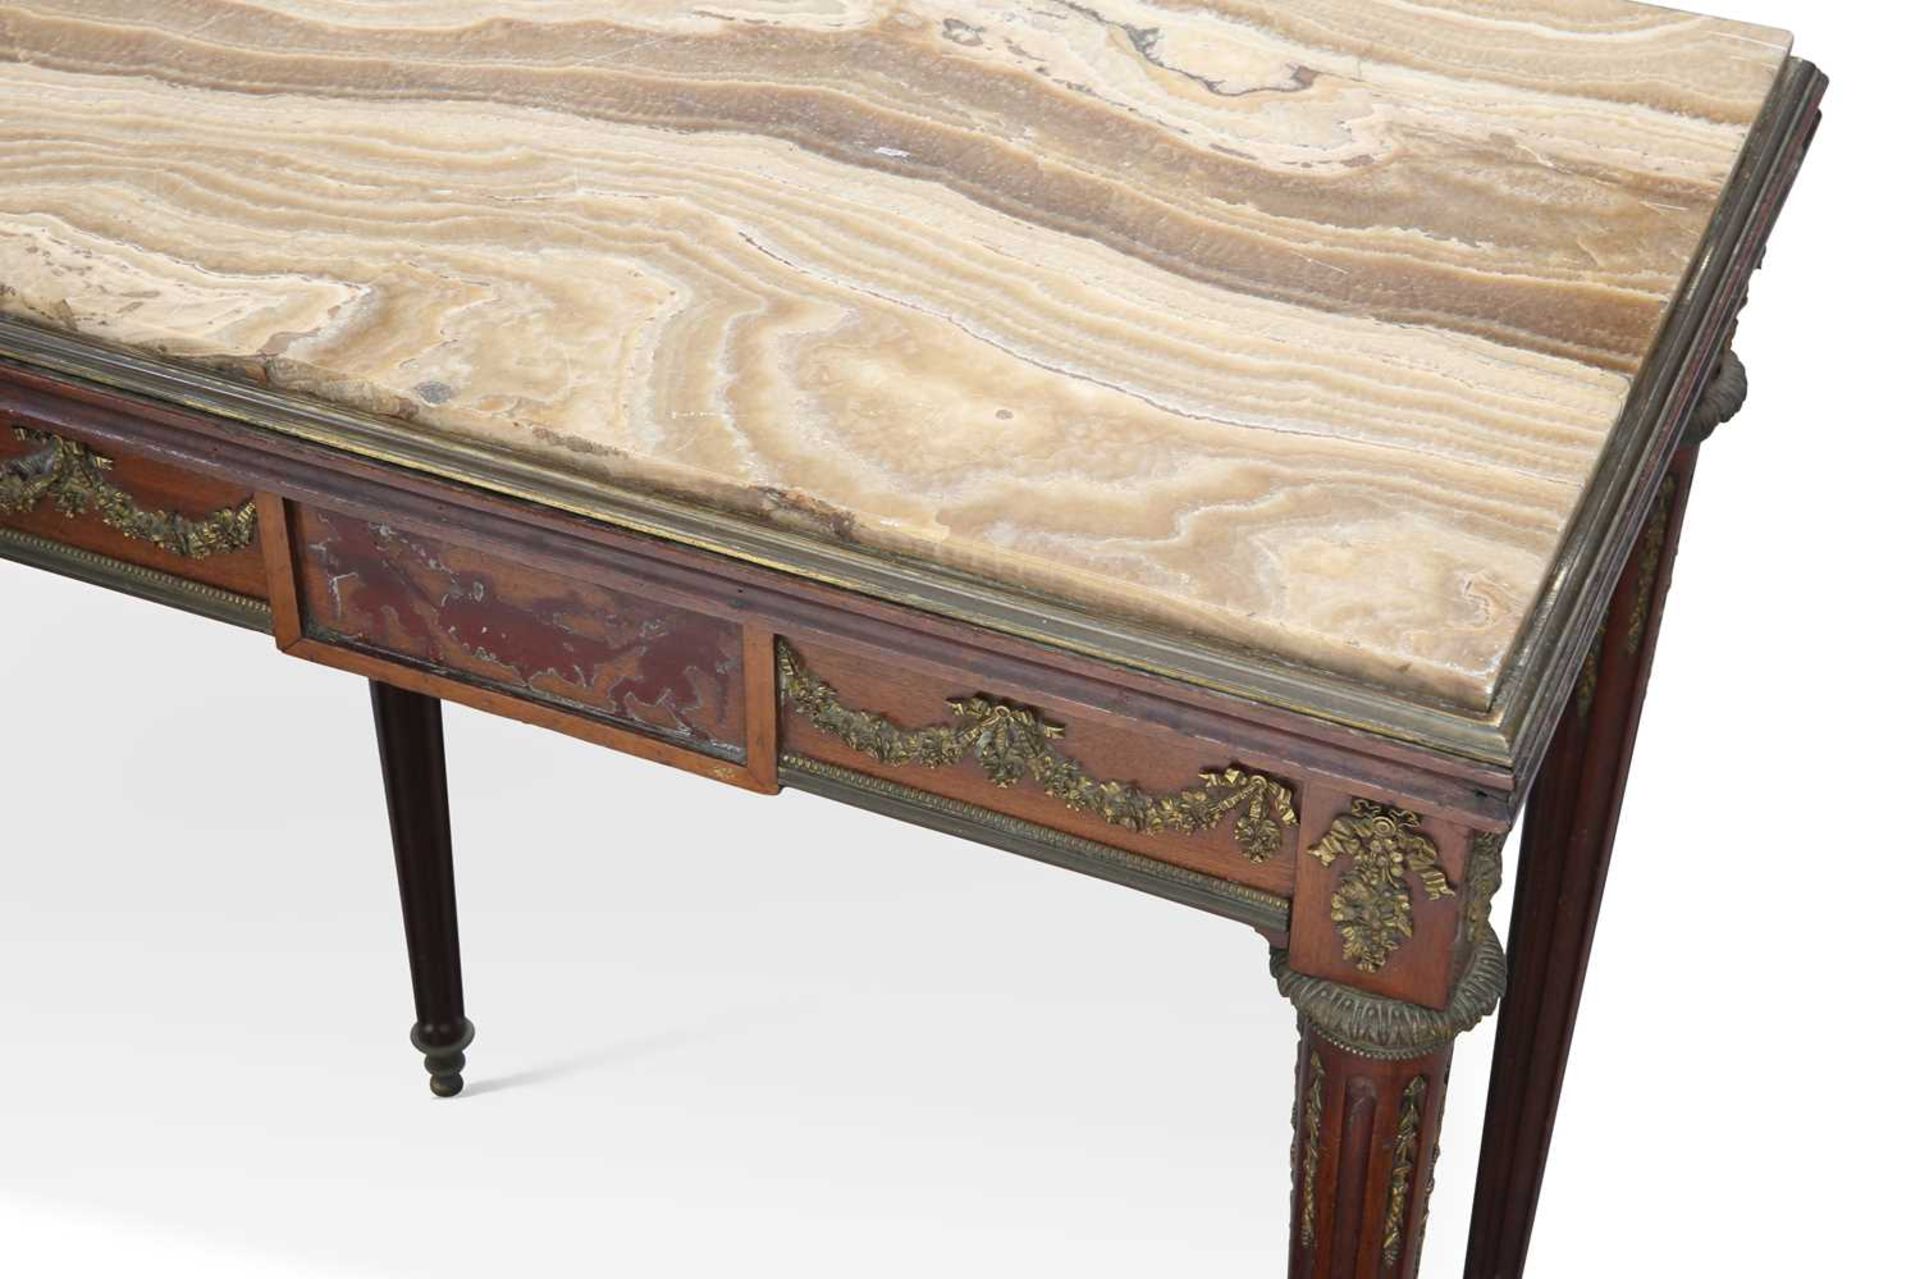 A LOUIS XVI STYLE MARBLE-TOPPED, GILT-METAL MOUNTED MAHOGANY SIDE TABLE - Image 2 of 12